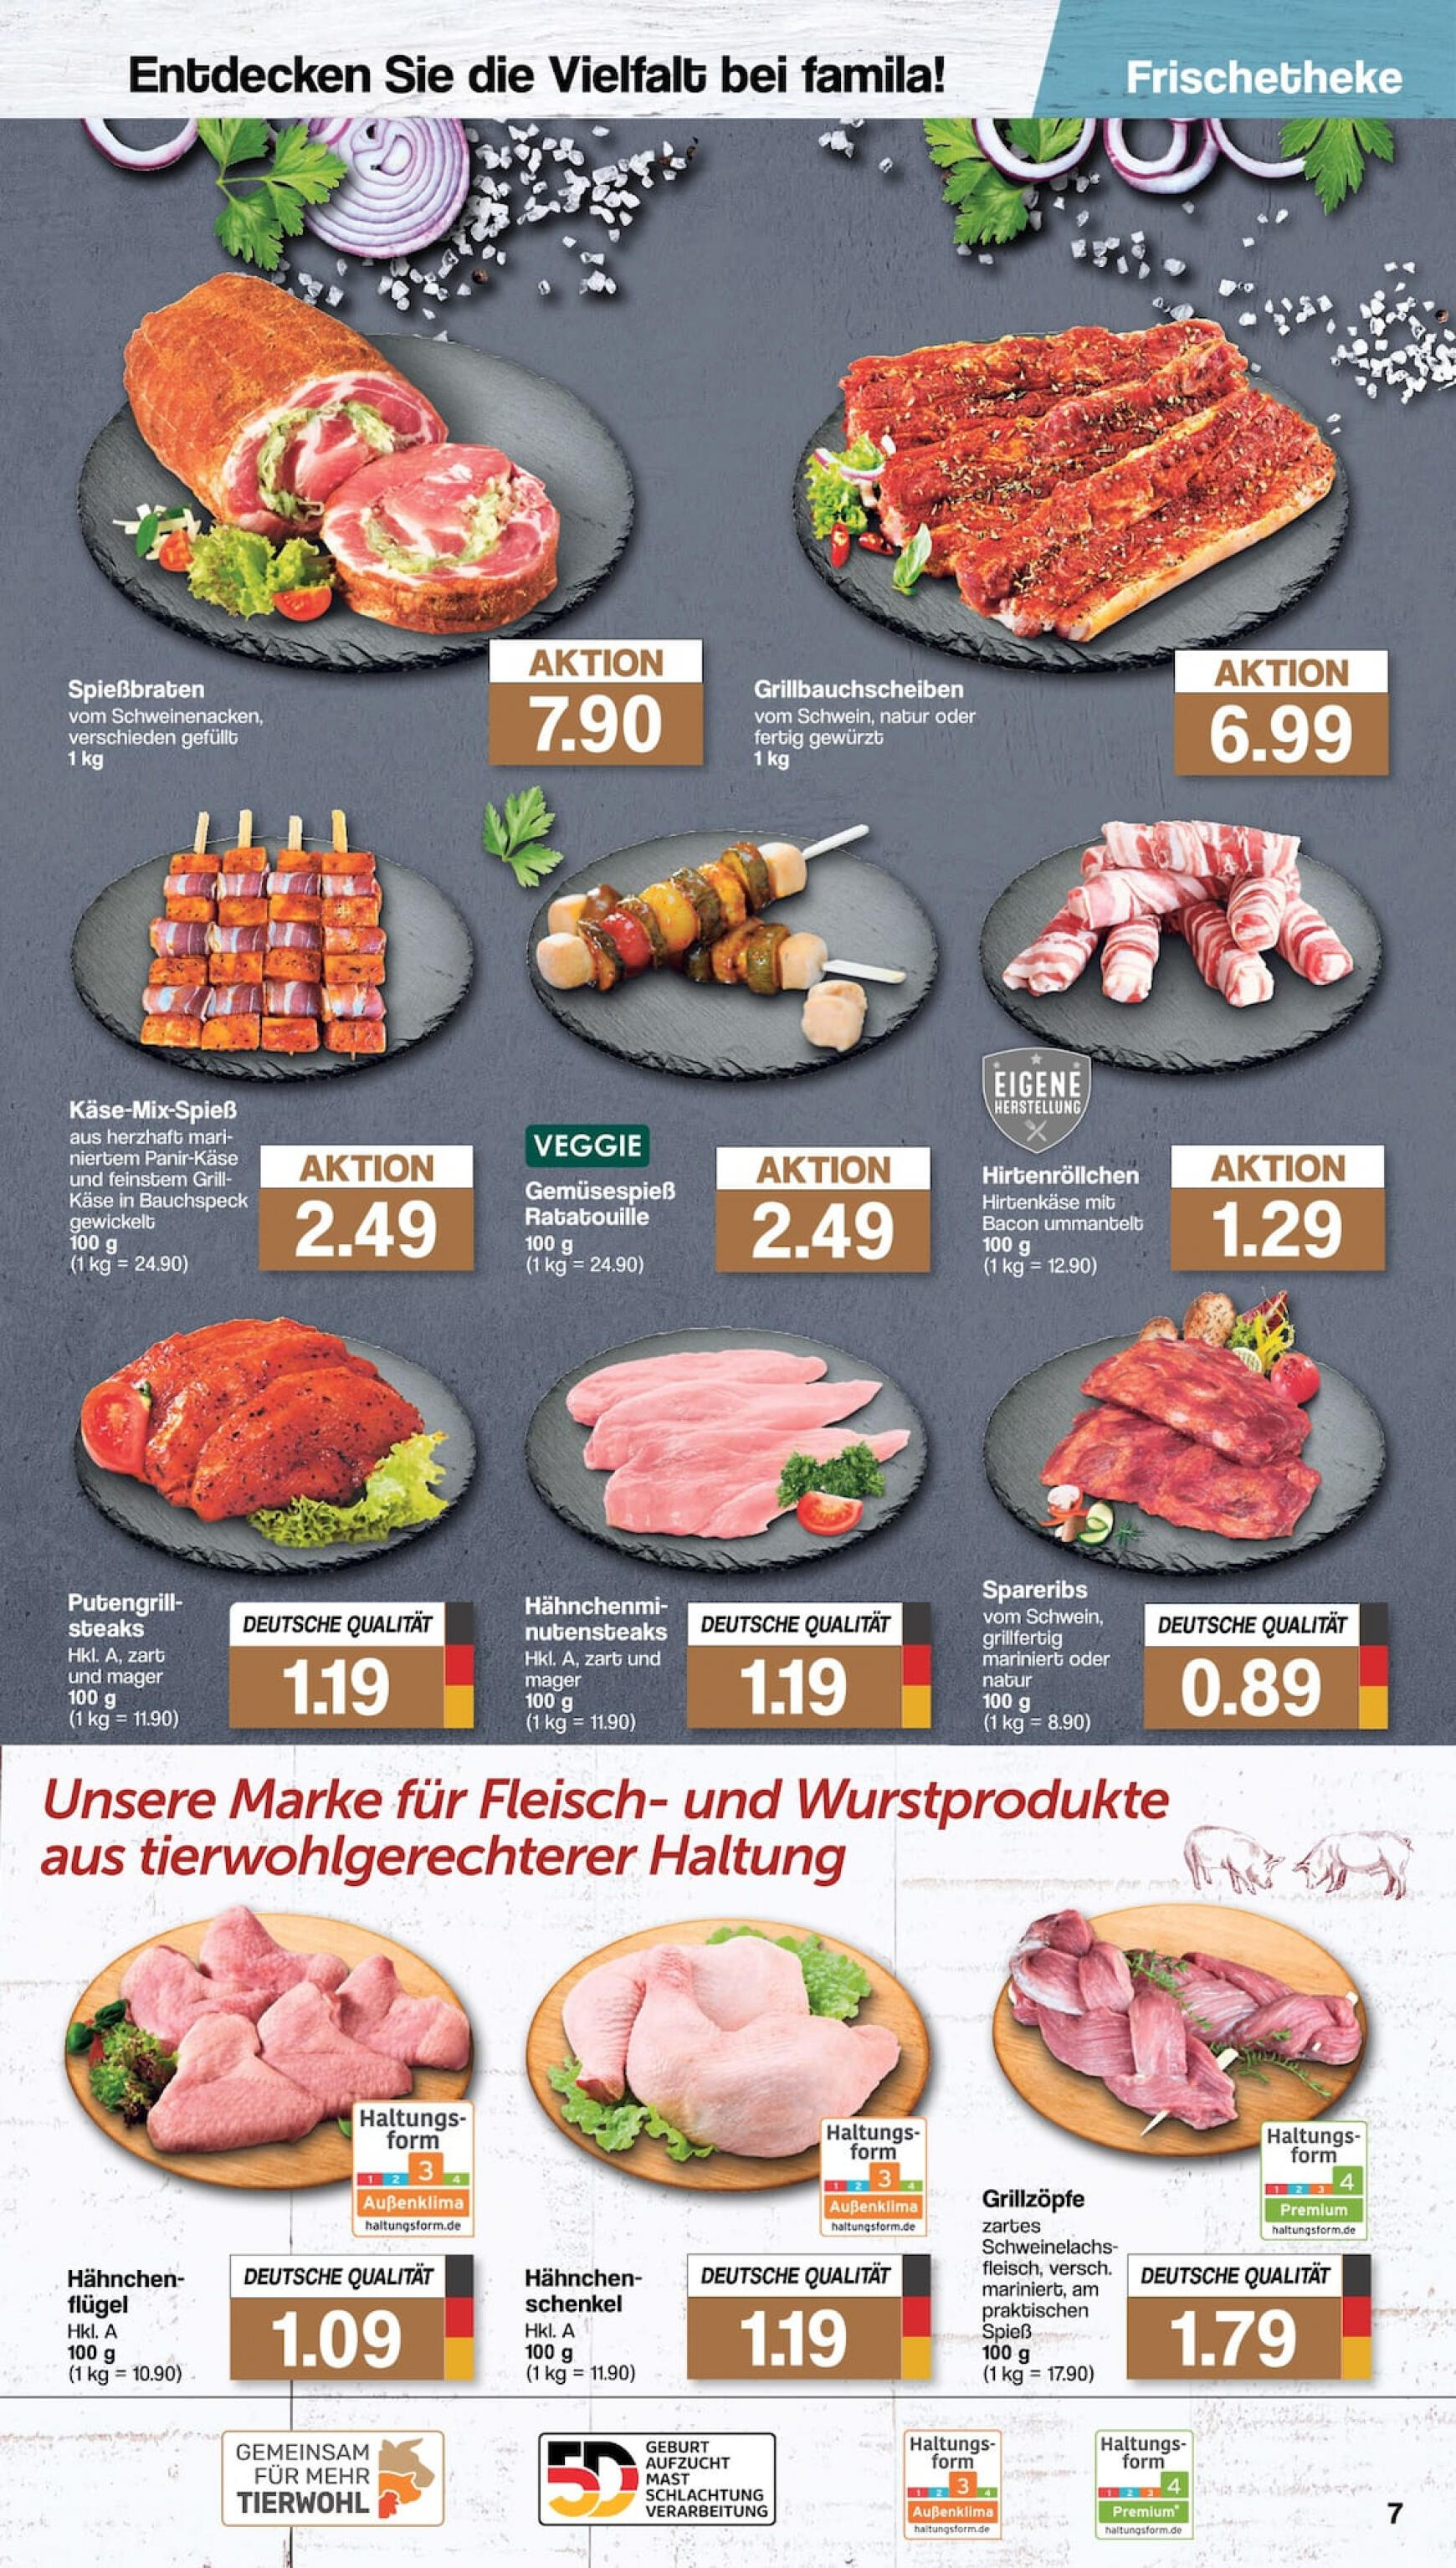 famila-nordwest - Flyer Famila Nordwest aktuell 22.04. - 27.04. - page: 7